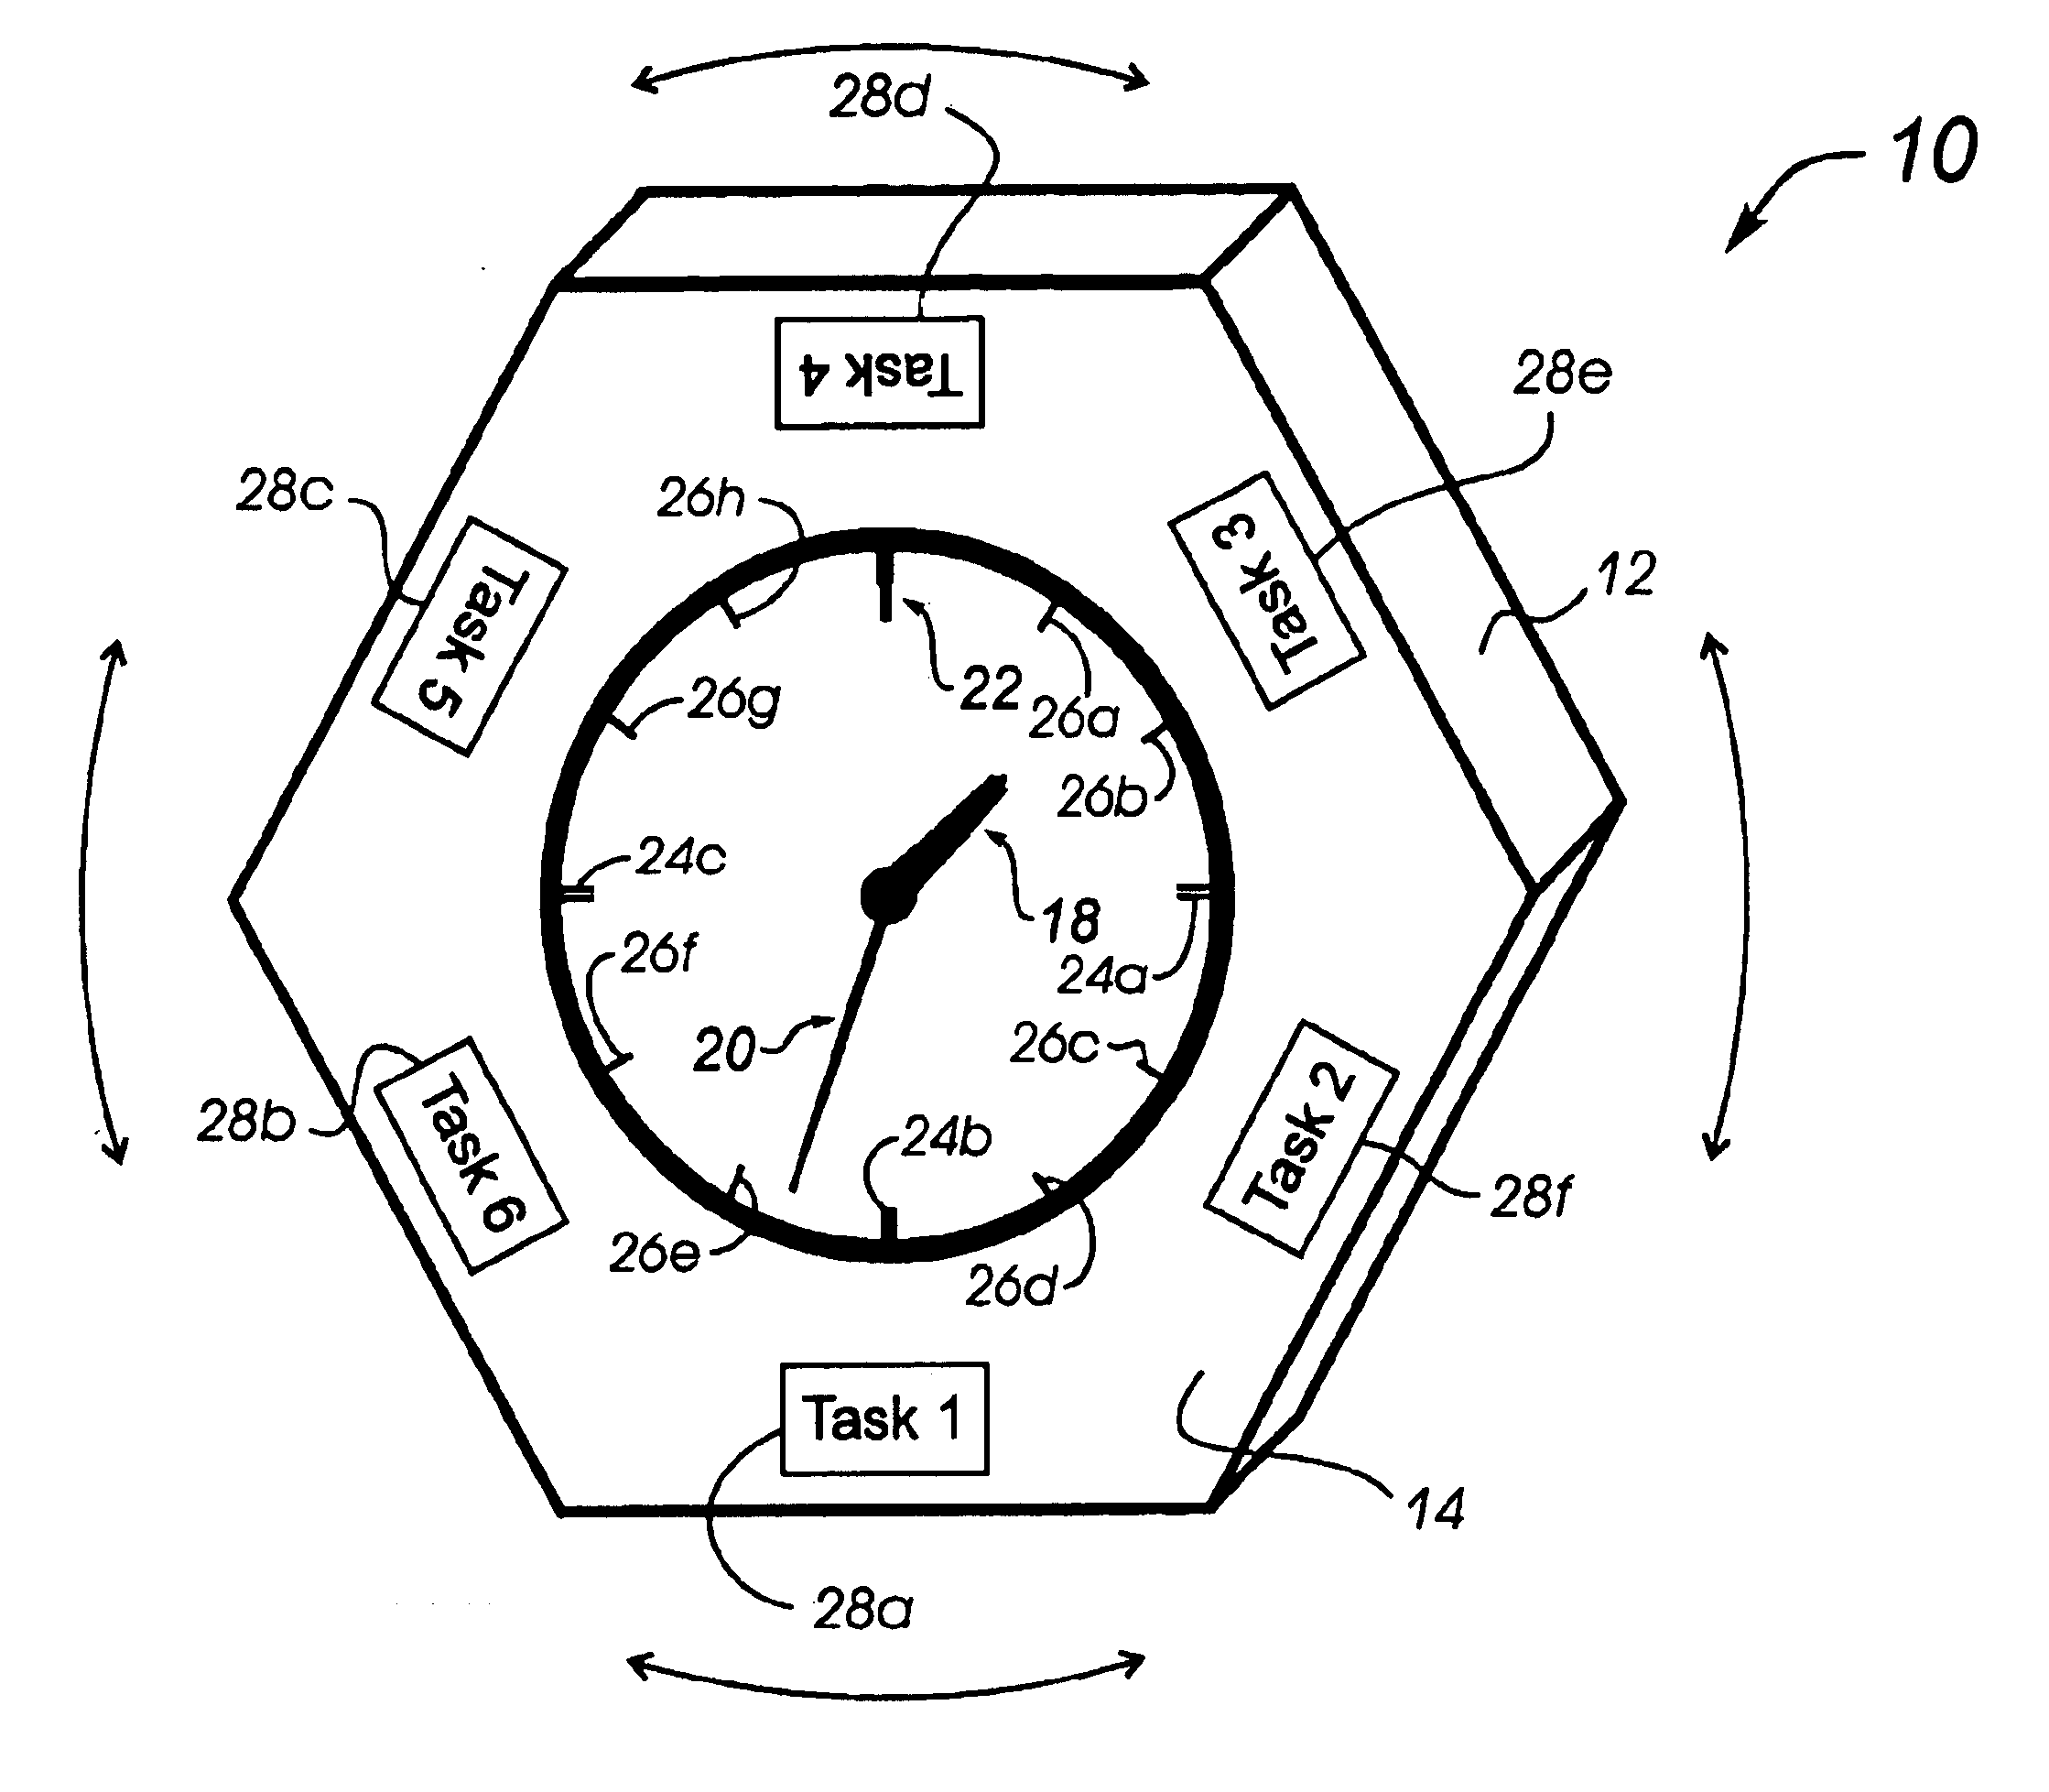 Apparatus and methods of providing enhanced control for consumers